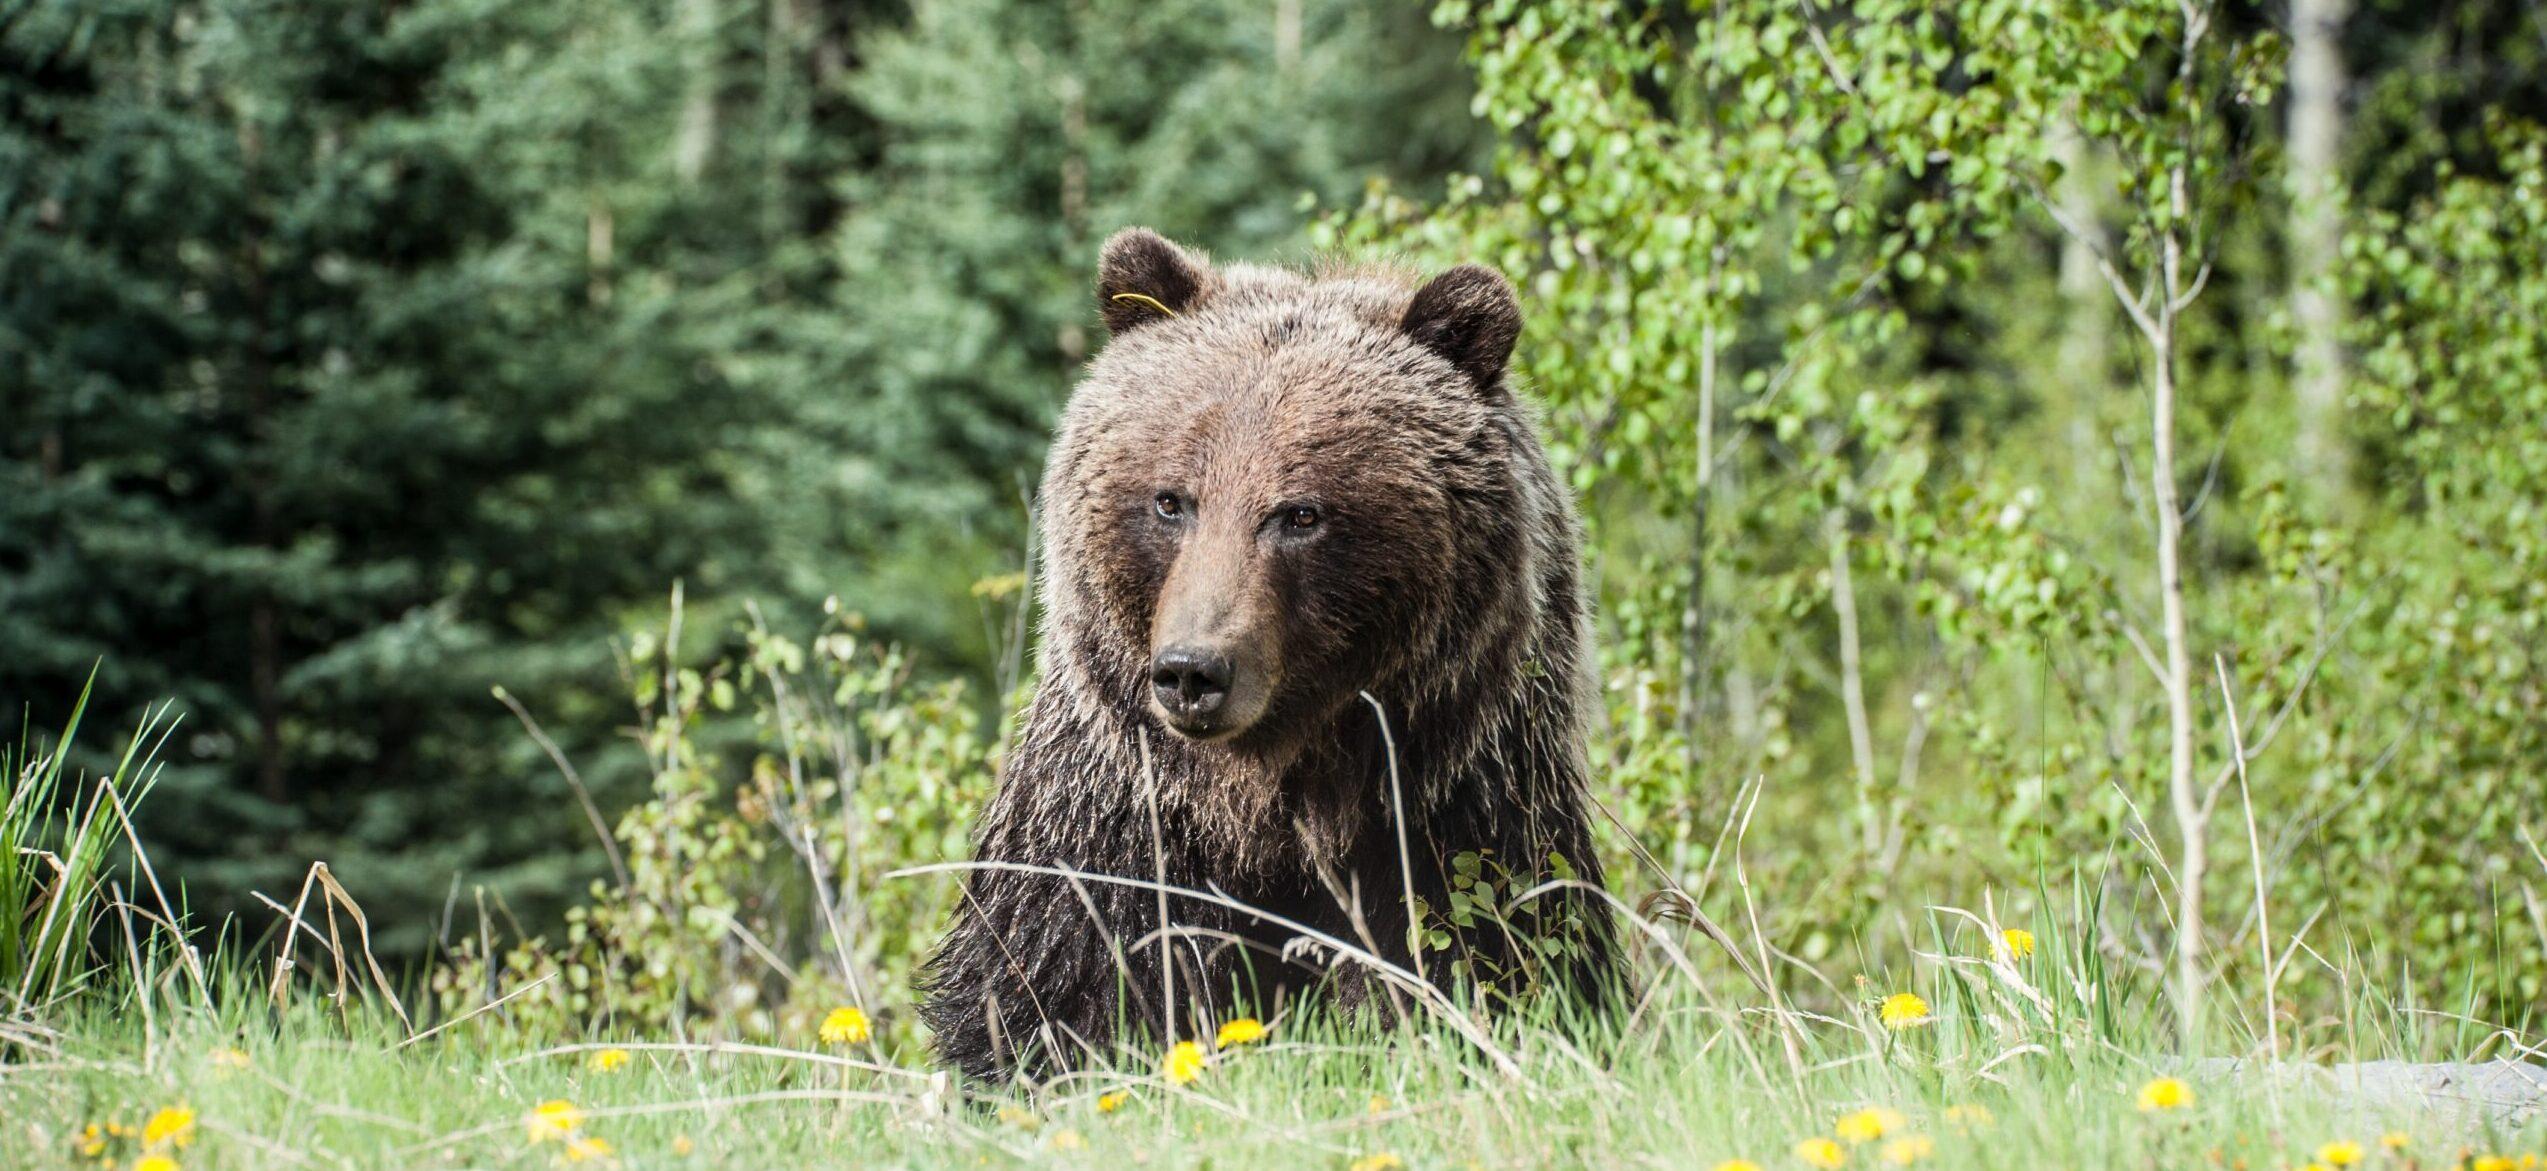 Social Media Defends Euthanized Grizzly Bear After Campers & Dog Mauled to Death In Banff